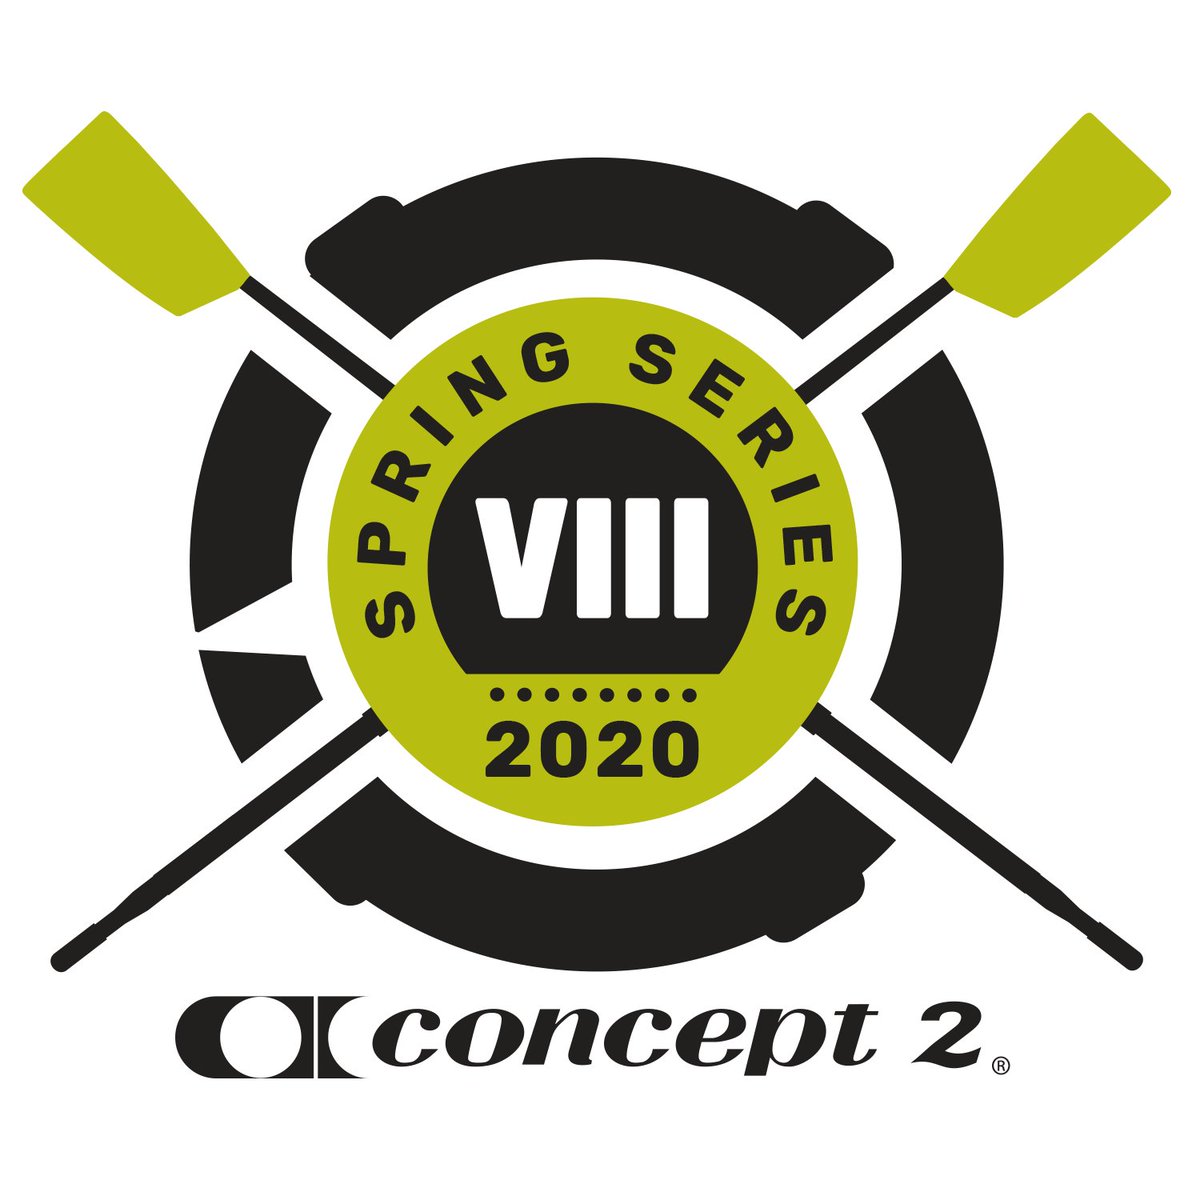 Concept2's Spring VIII Series challenge kicks off today, with week one featuring the classic 6k. Put your virtual boat together and see where you stack up! Sign up now! ow.ly/OKaH50z6oig #Concept2 #C2Challenge